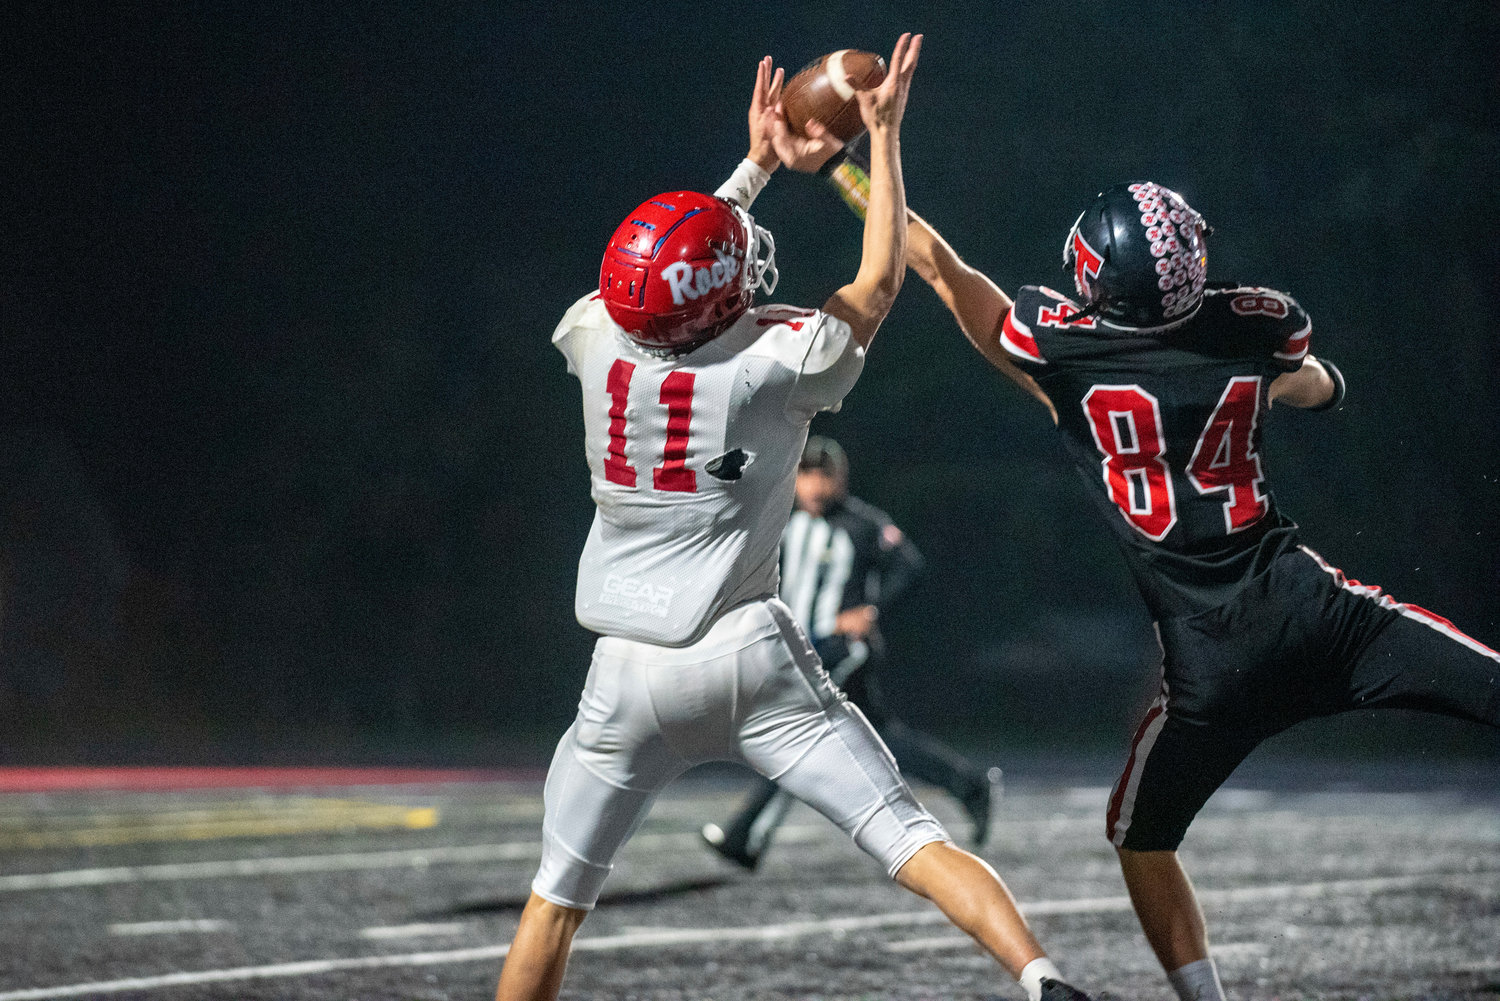 Tenino's Keegan O'Connor (84) breaks up a Castle Rock pass intended for Lane Partridge (11) on Friday, Nov. 5.